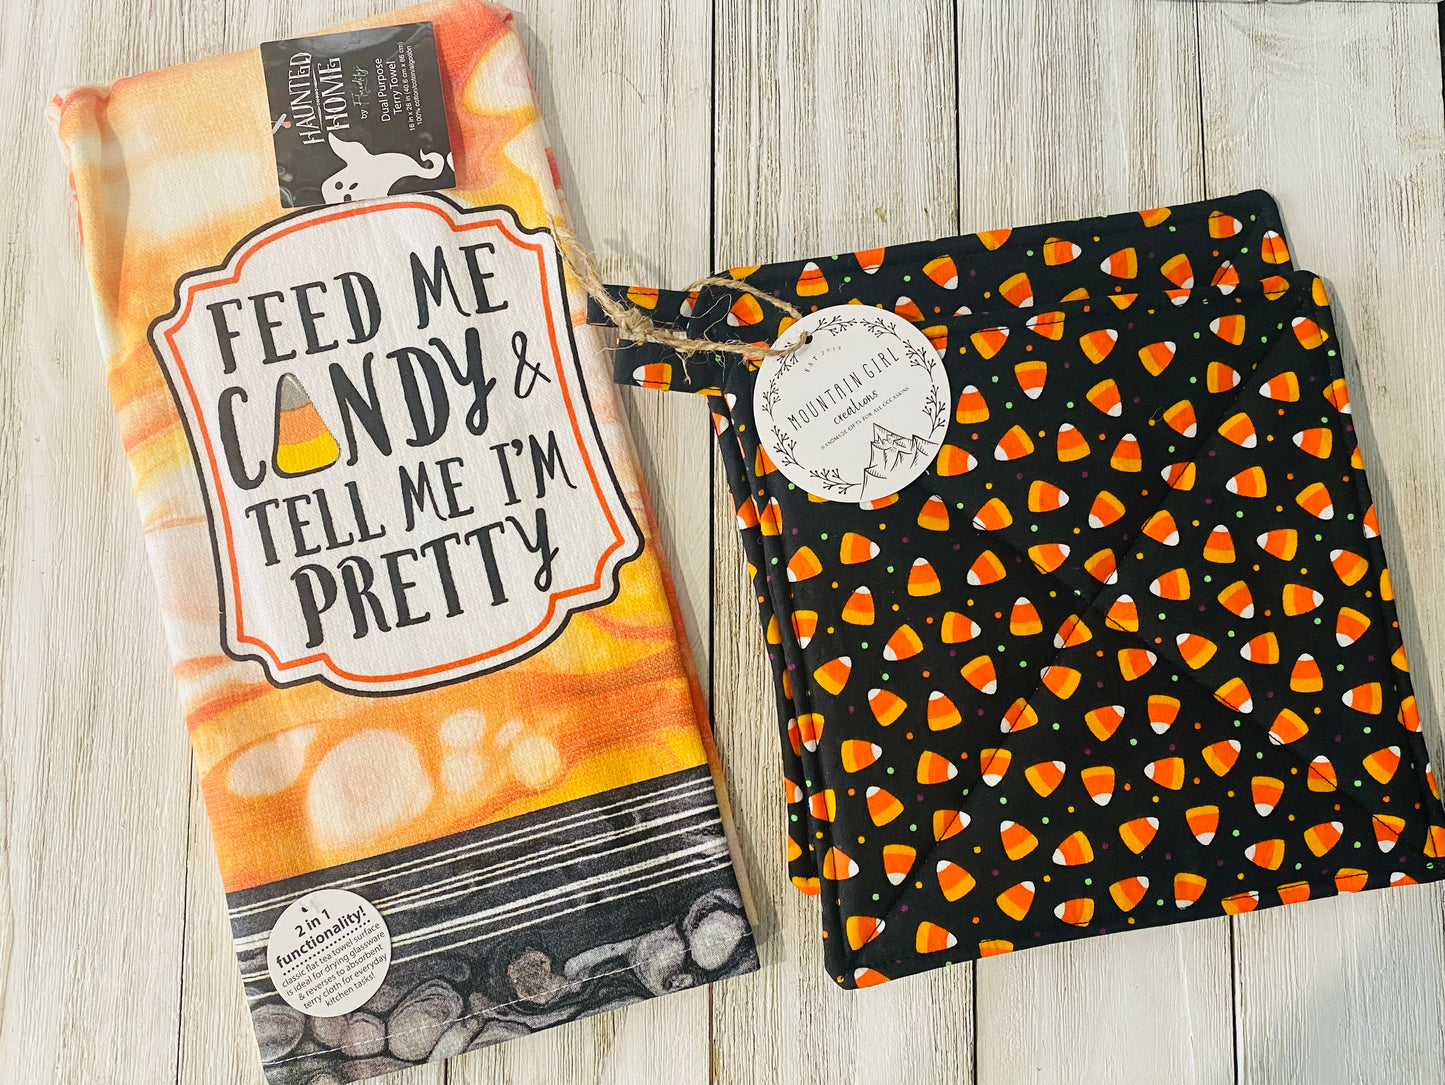 Dish Towel - Halloween Themed - Feed Me Candy and Tell Me I'm Pretty